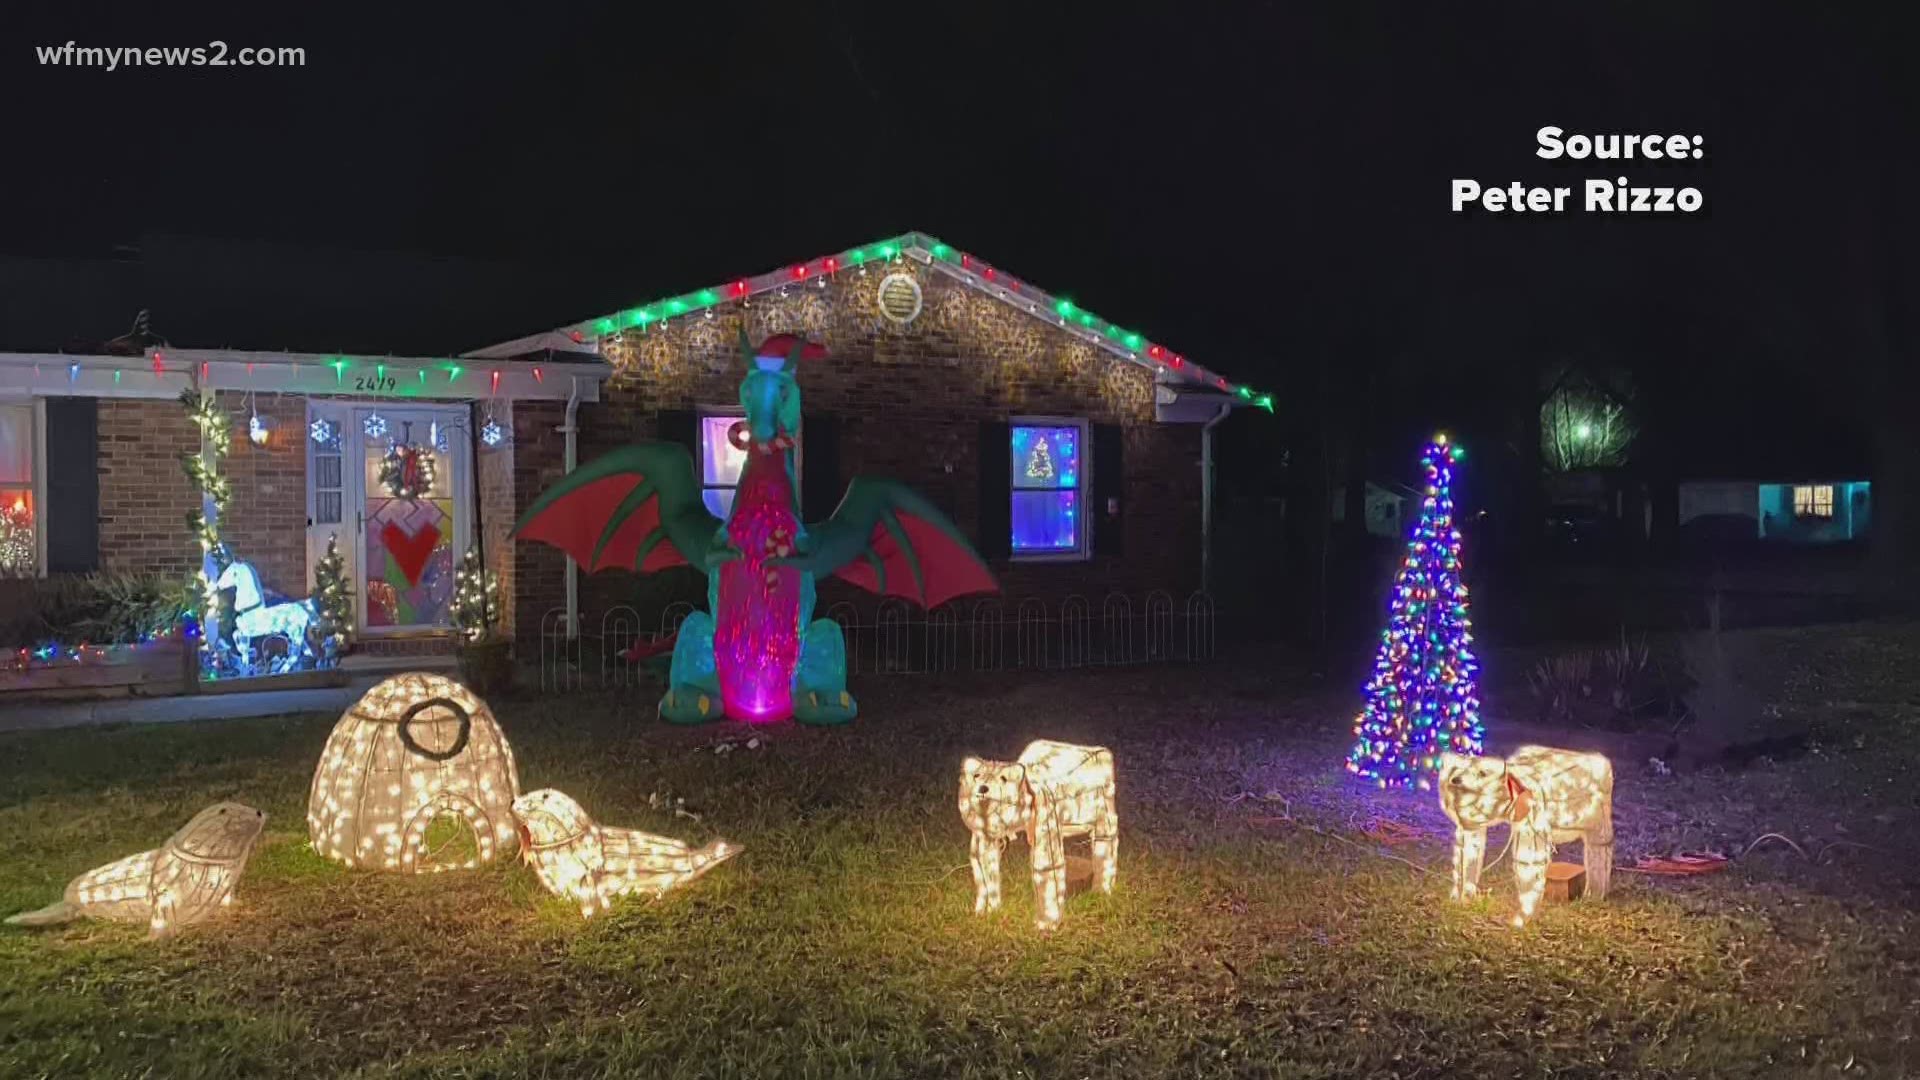 Peter Rizzo and his family have put together a Christmas village in their Kernersville neighborhood for years.